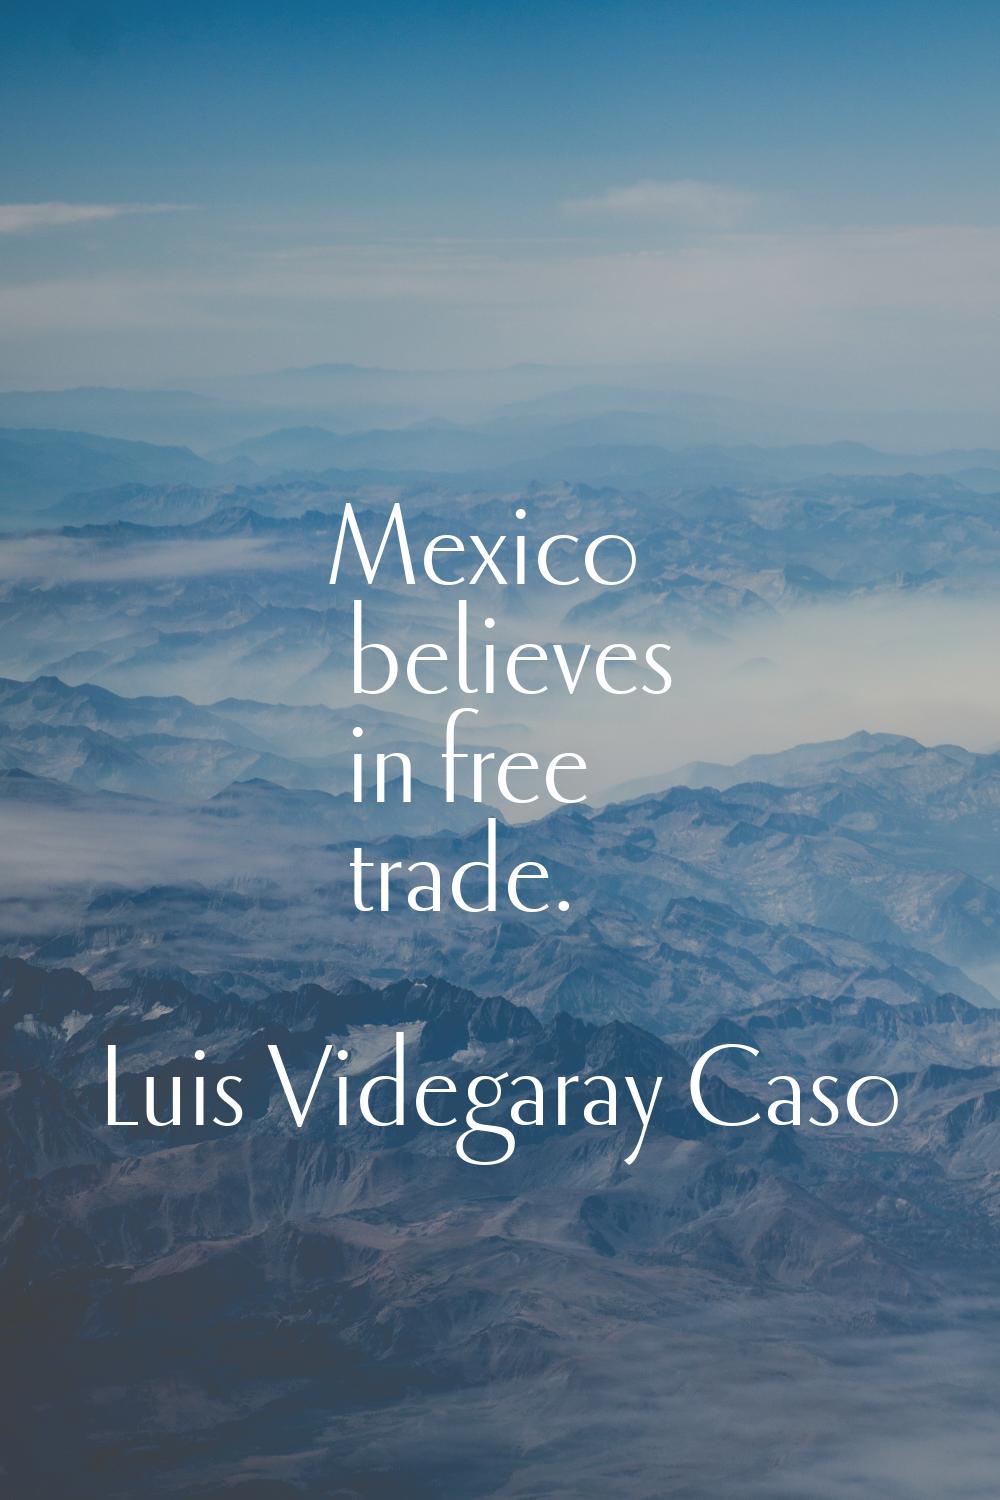 Mexico believes in free trade.